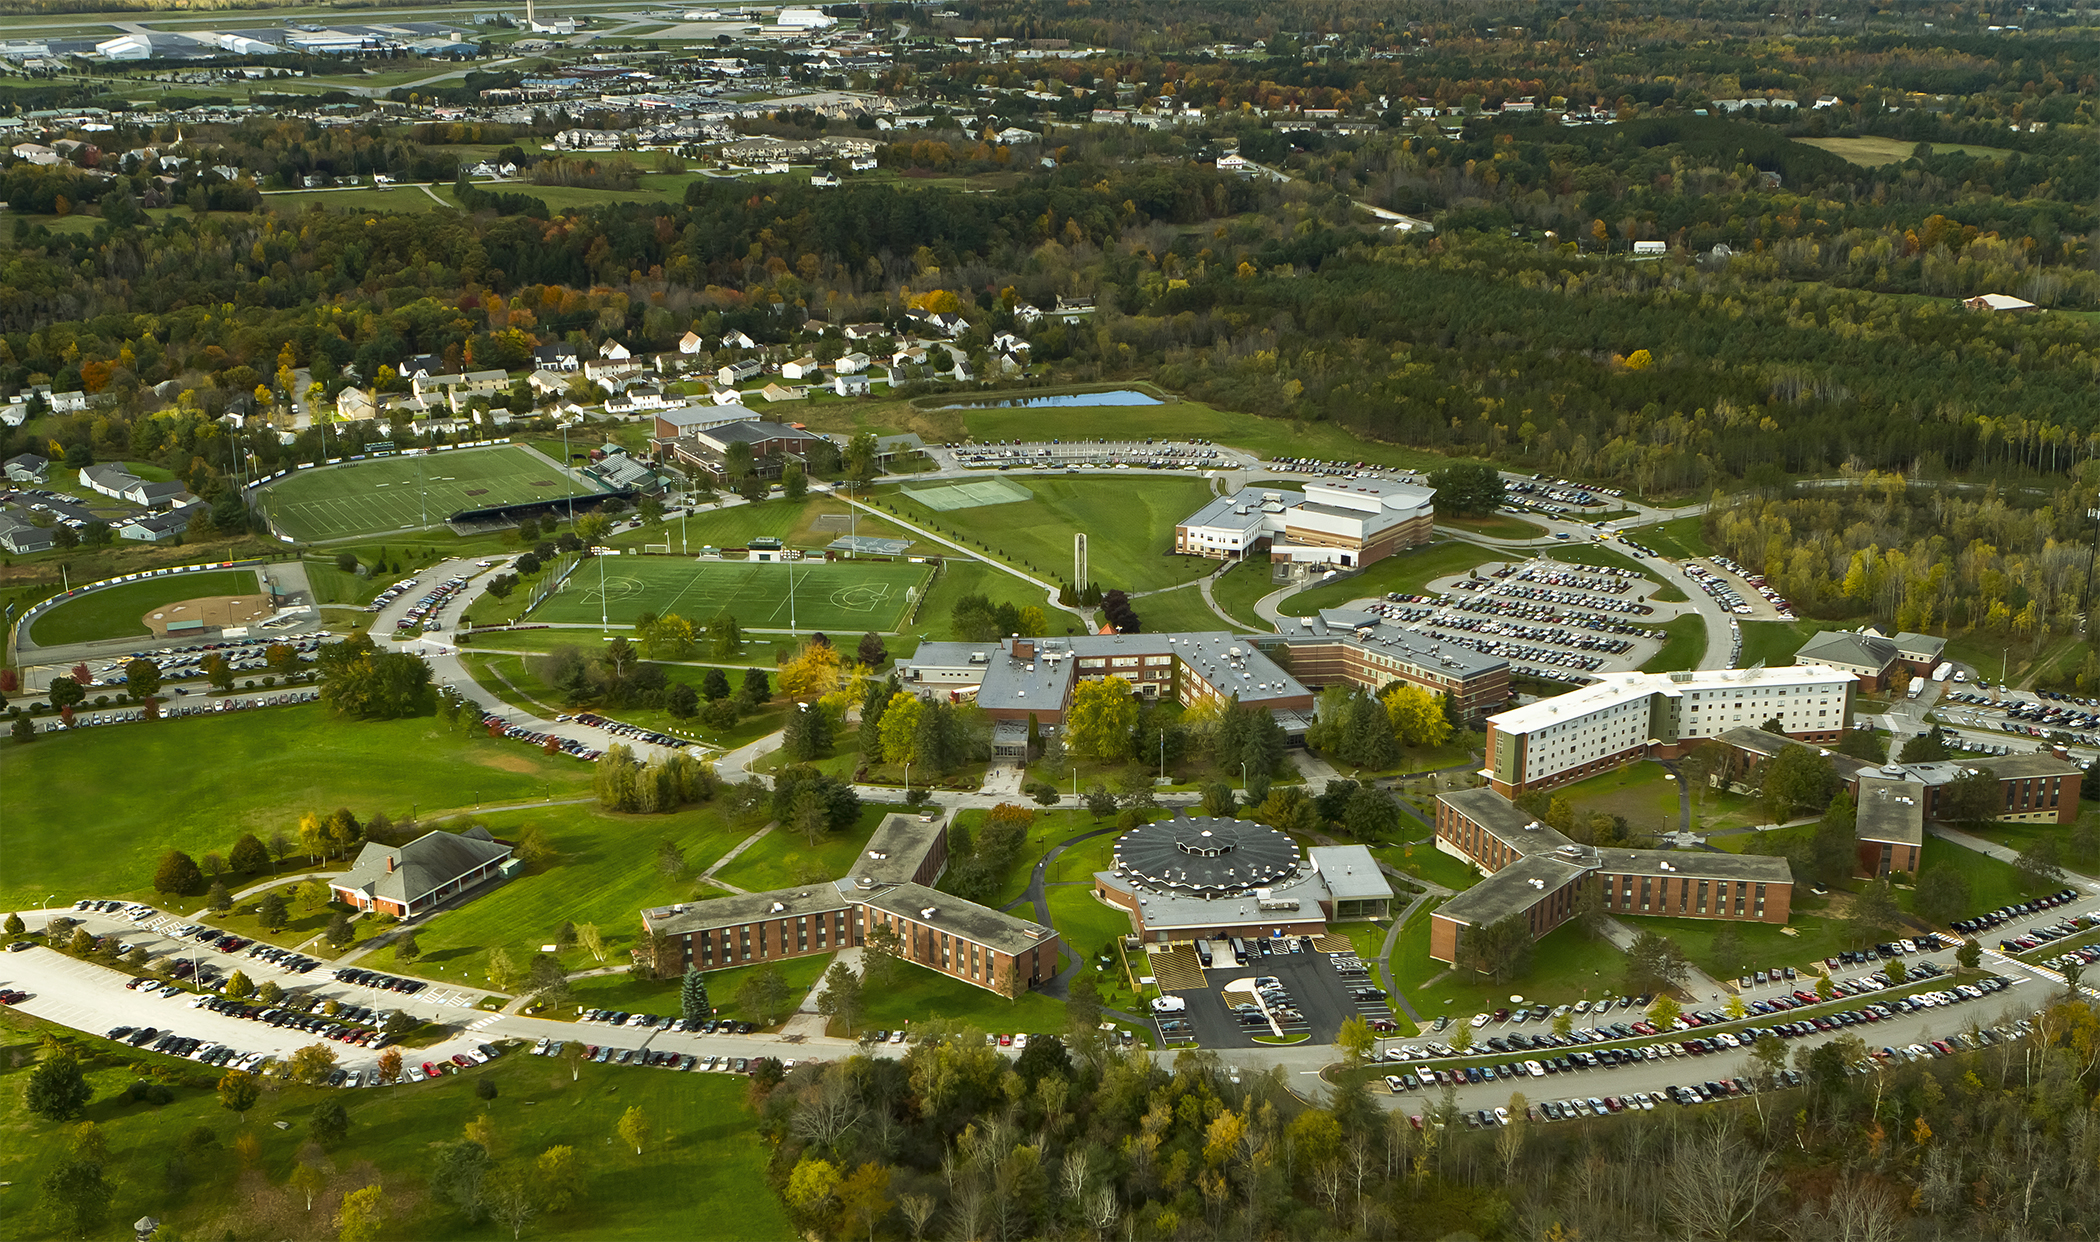 Husson University has a beautiful 208-acre campus in scenic Bangor, Maine.